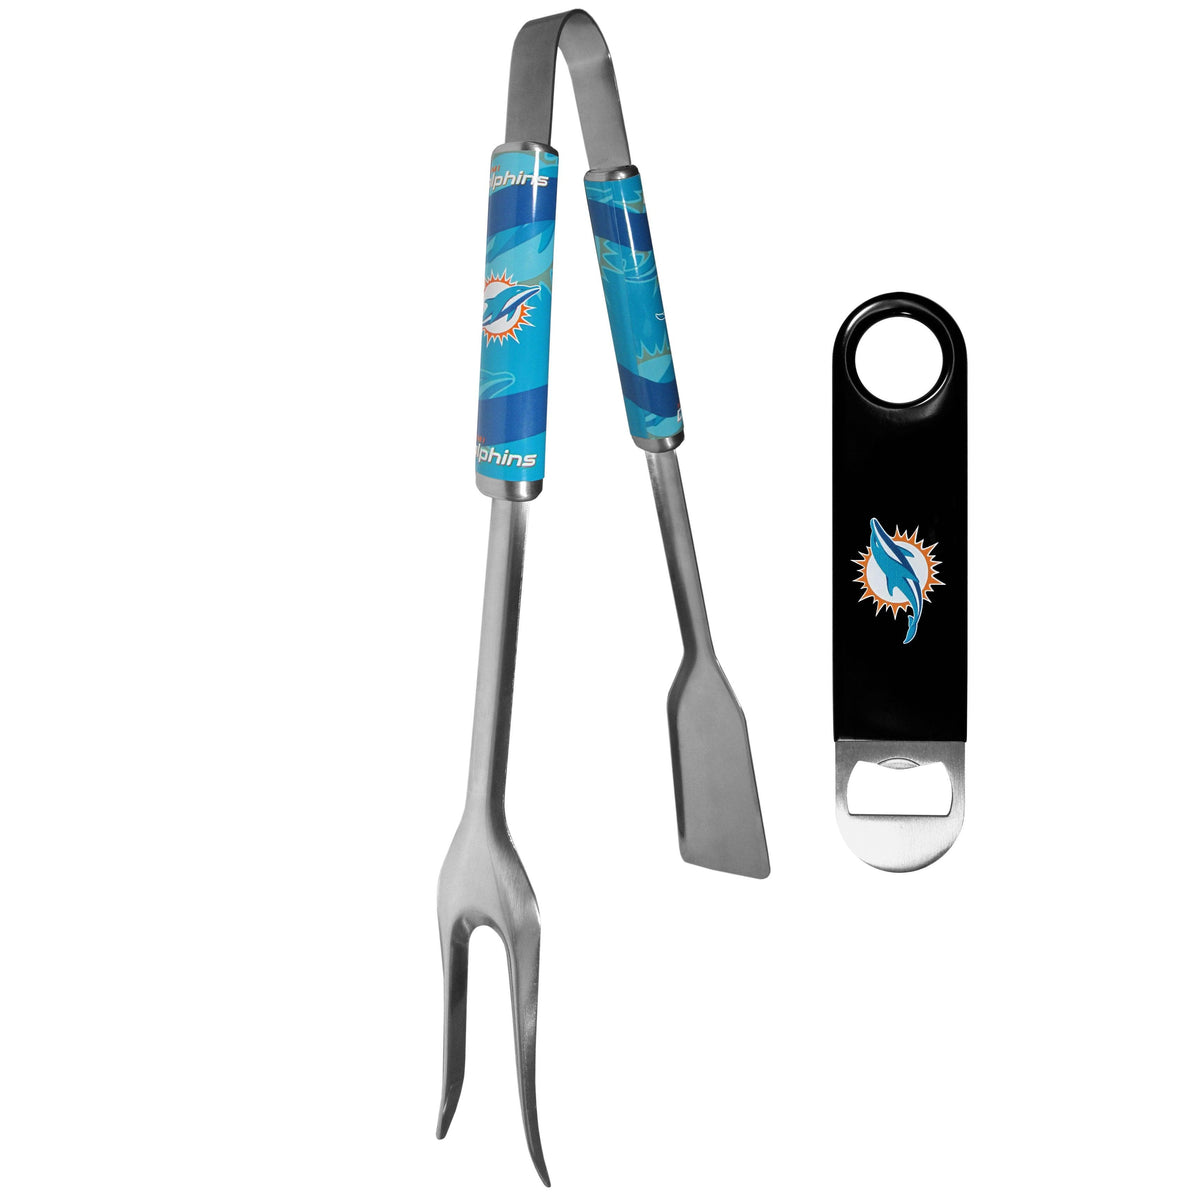 Miami Dolphins 3 in 1 BBQ Tool and Bottle Opener - Flyclothing LLC